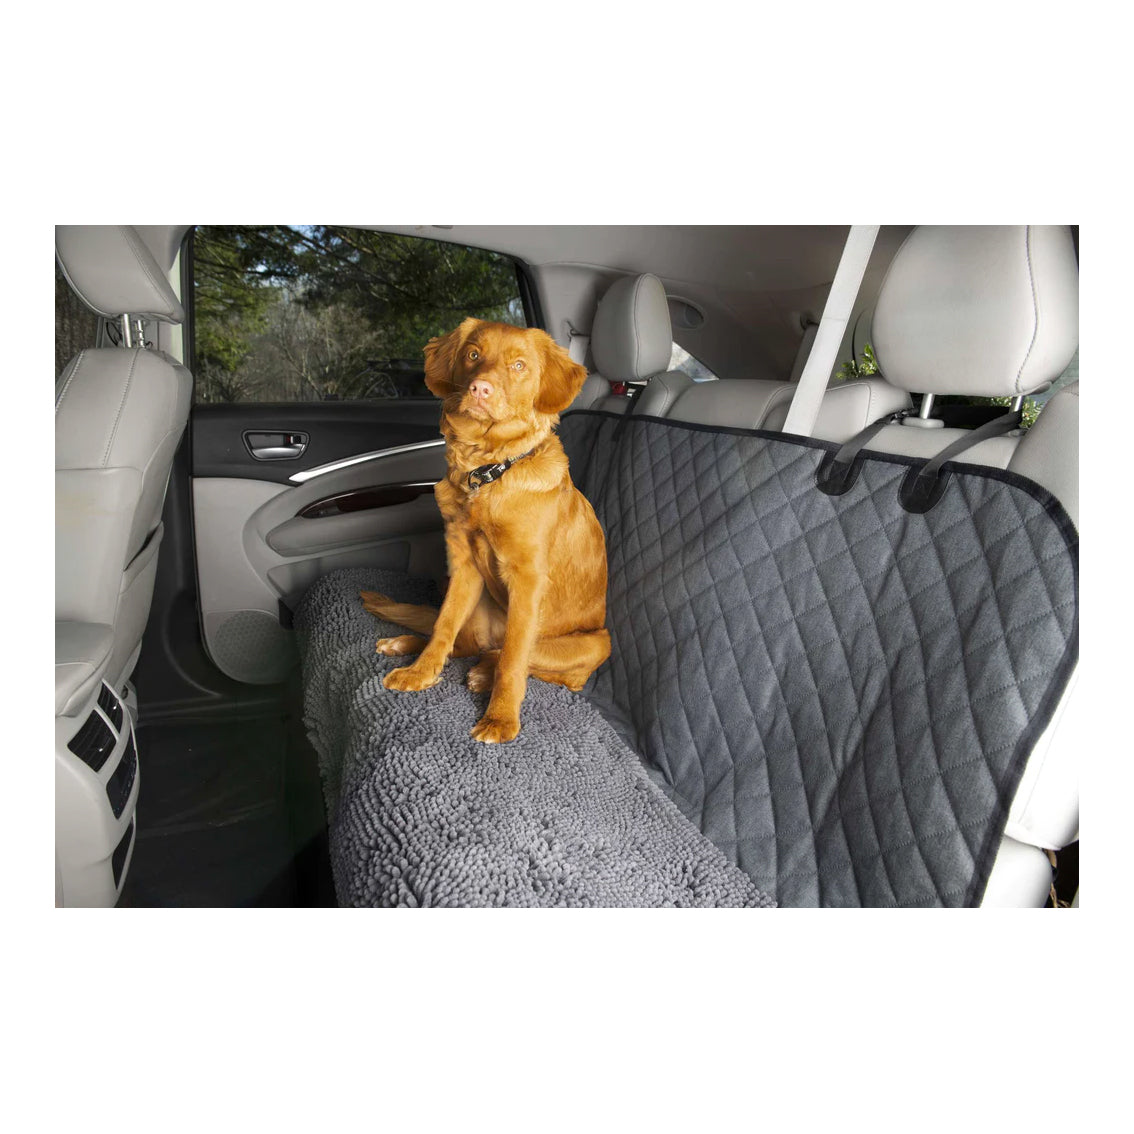 Dirty Dog 3-in-1 Car Seat Cover &amp; Hammock